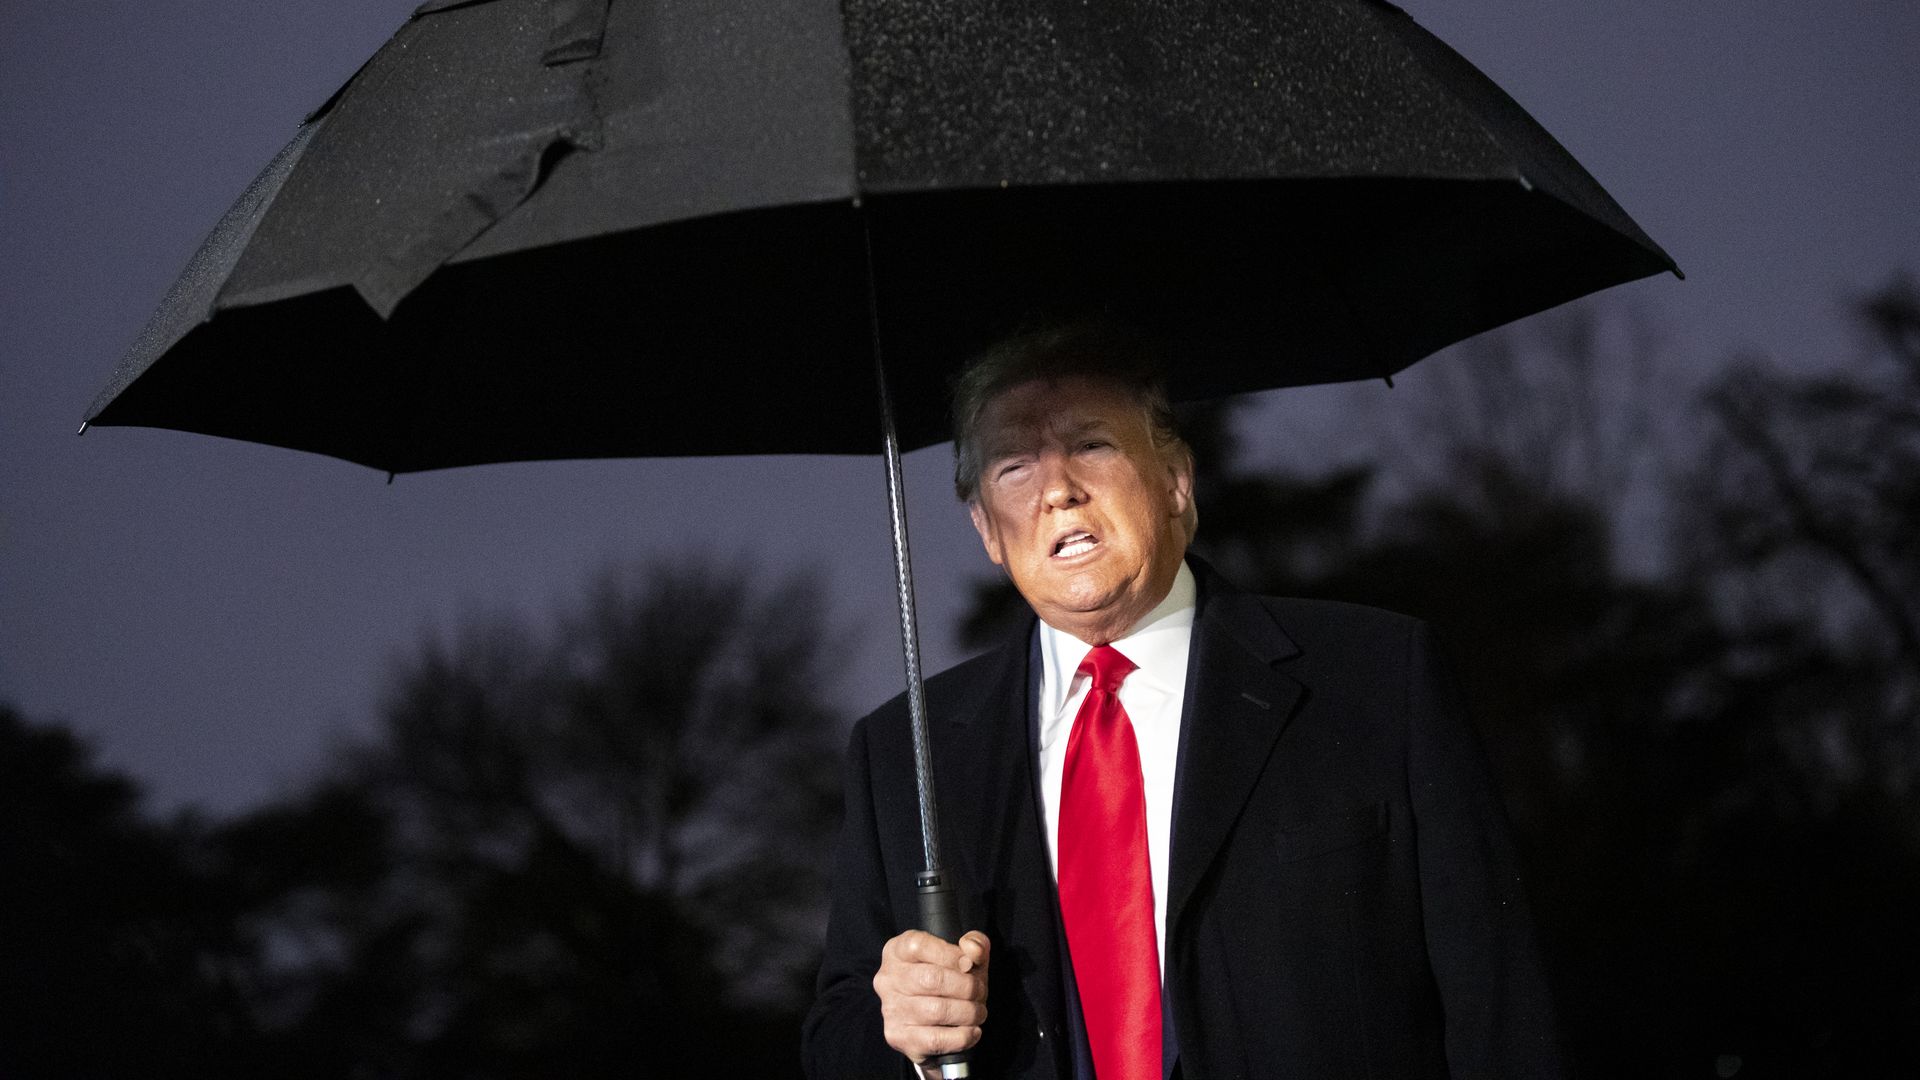 In this image, Trump holds an umbrella